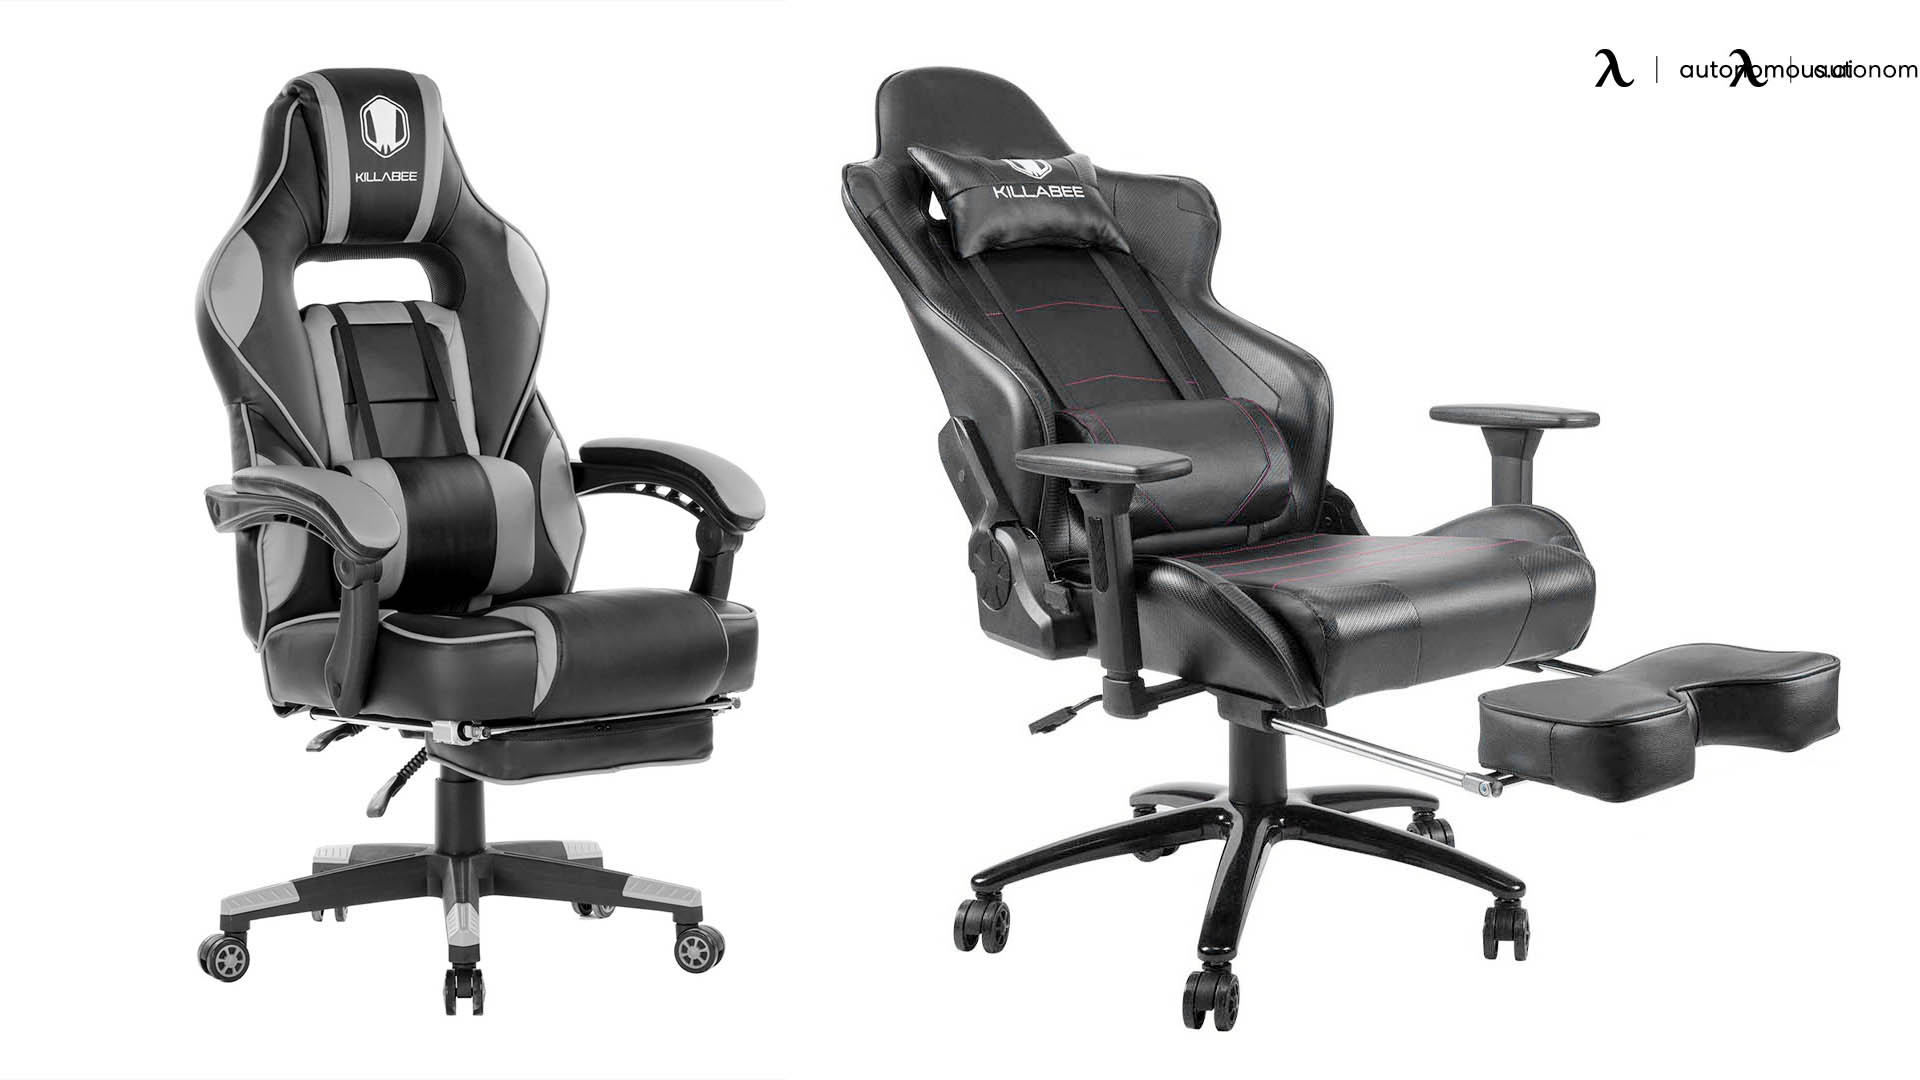 https://cdn.autonomous.ai/static/upload/images/common/upload/20210422/The-Best-Office-Chair-with-Leg-Rest-features-10-Editors-Choices-for-2021_5bb9f755532.jpg